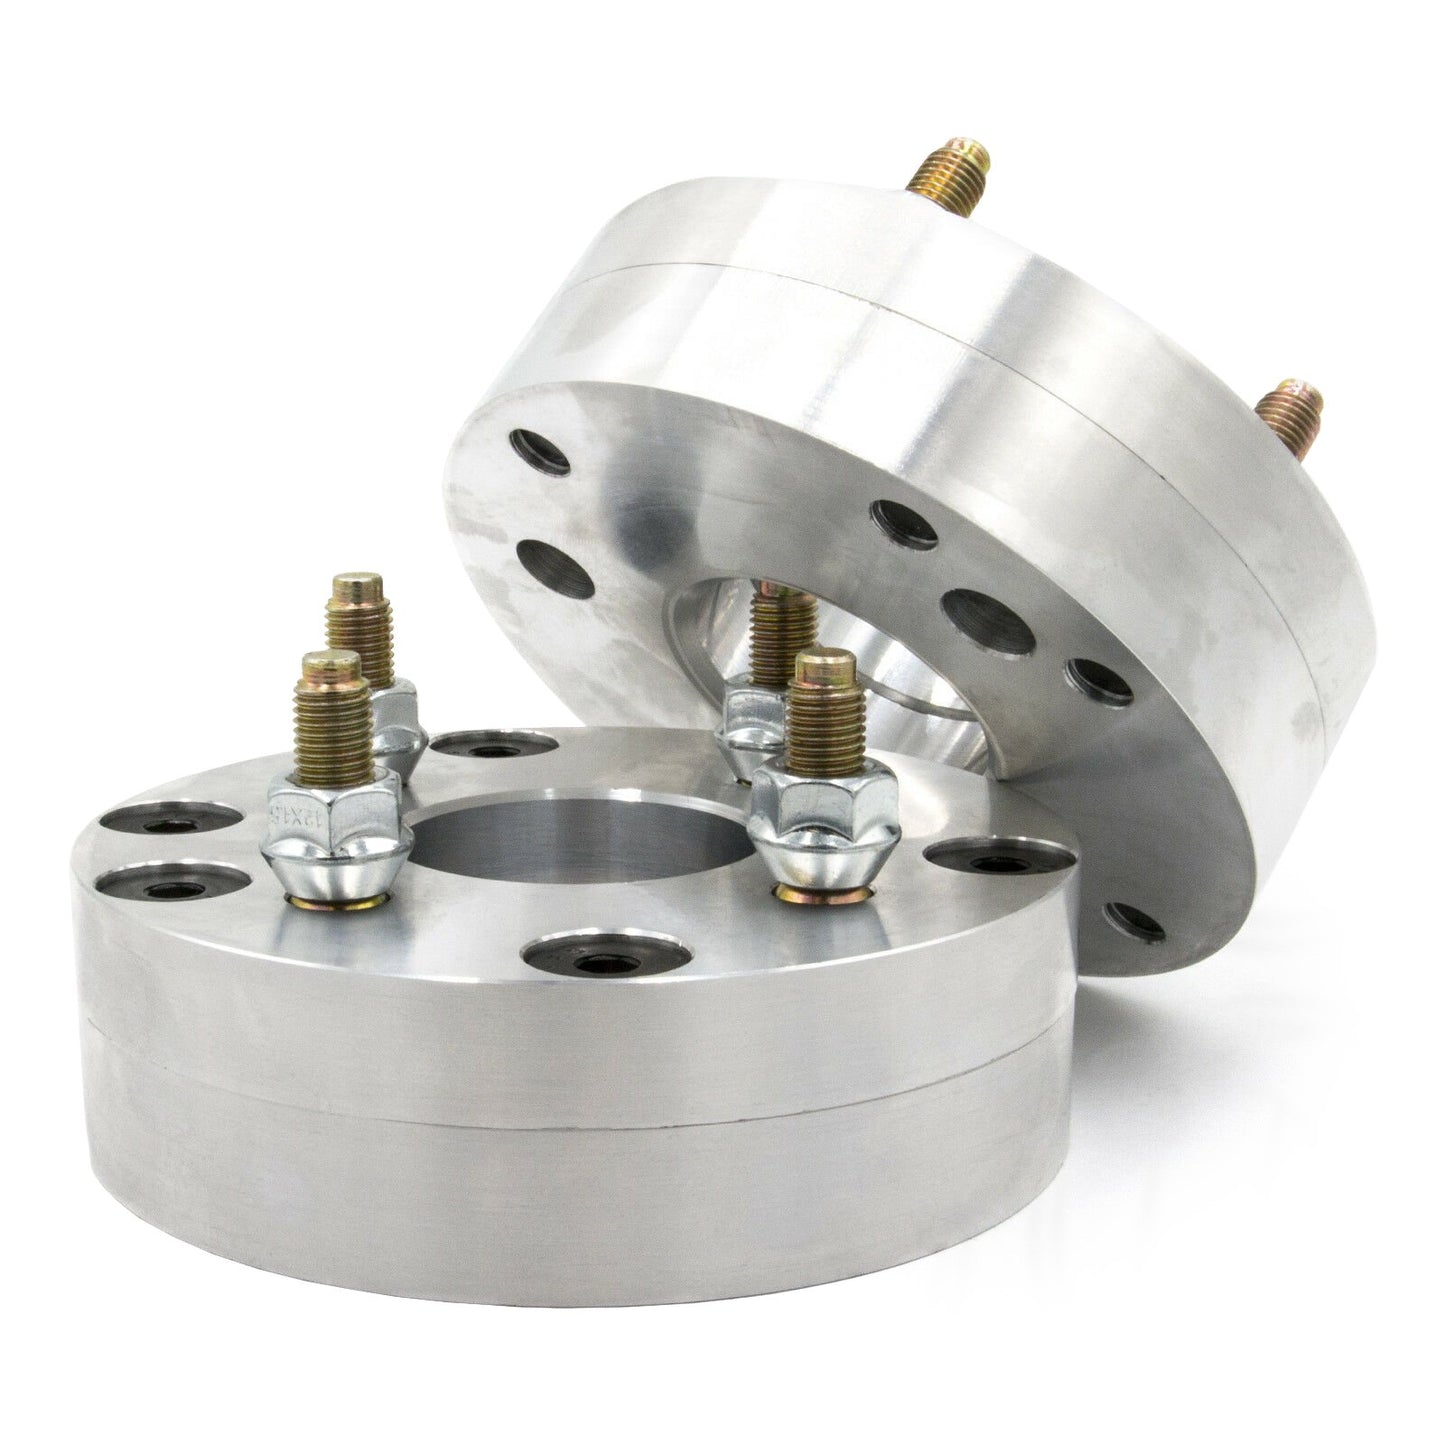 5x98 to 4x108 2 piece Wheel Adapter - Thickness: 1.5" - 3"